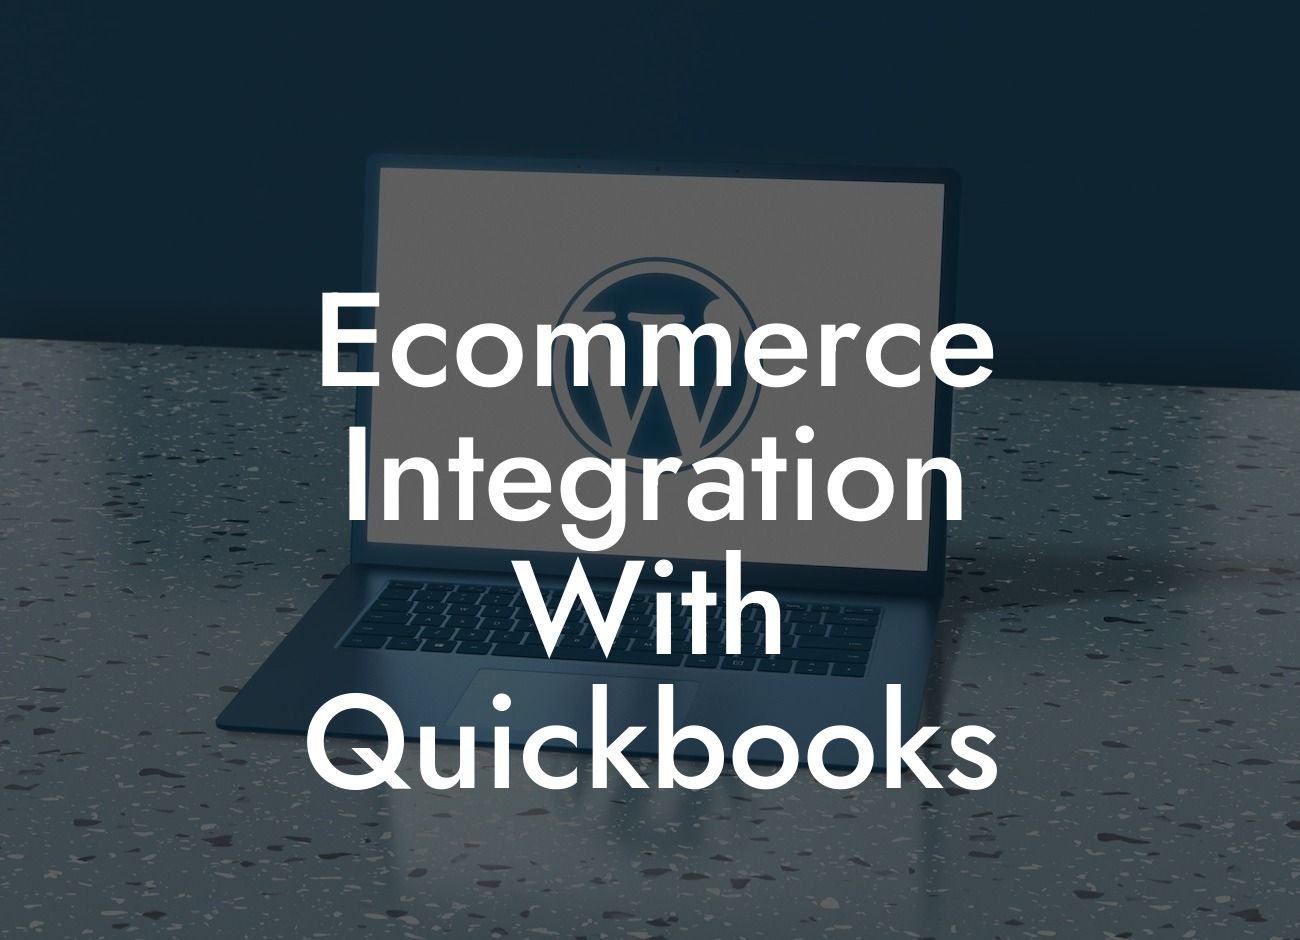 Ecommerce Integration With Quickbooks